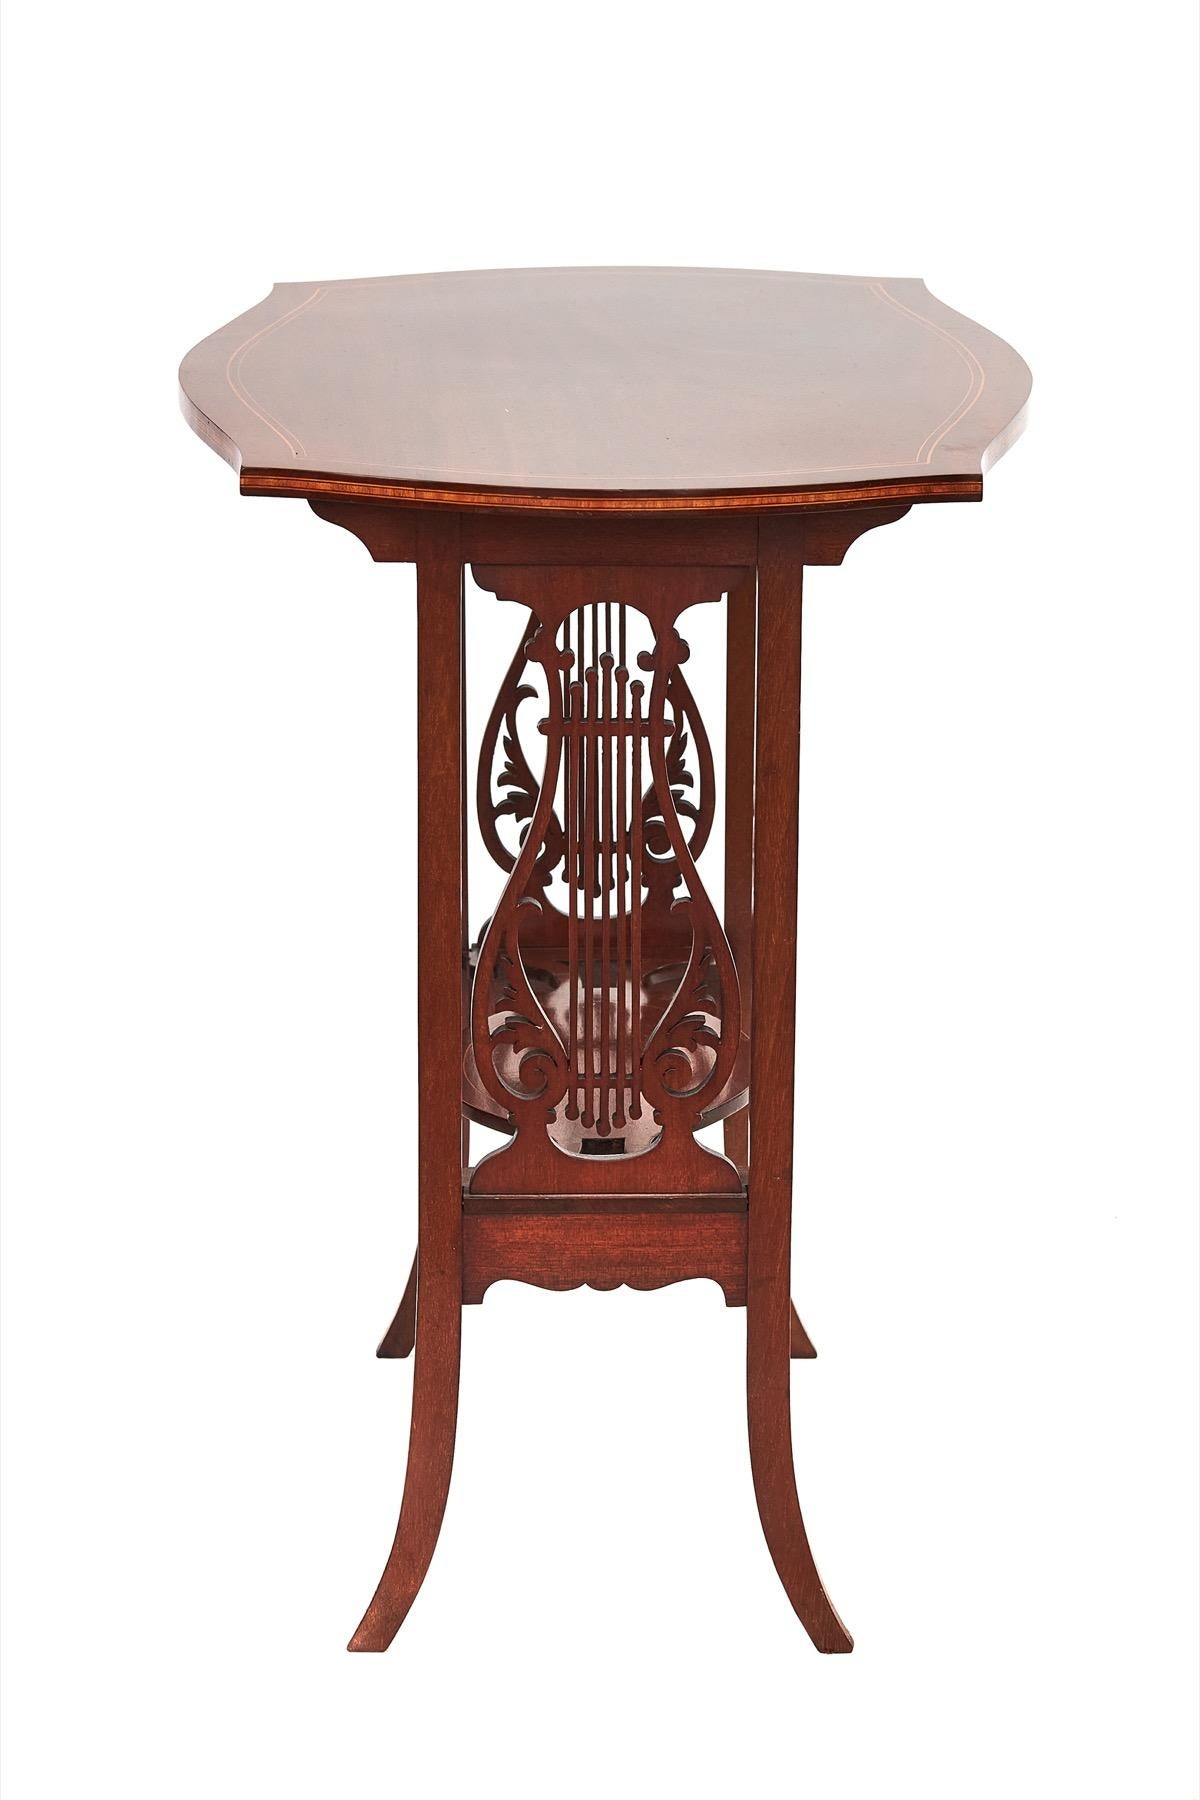 Early 20th Century Fine Sheraton Revival Mahogany Inlaid & carved Lyre end support table[B] For Sale